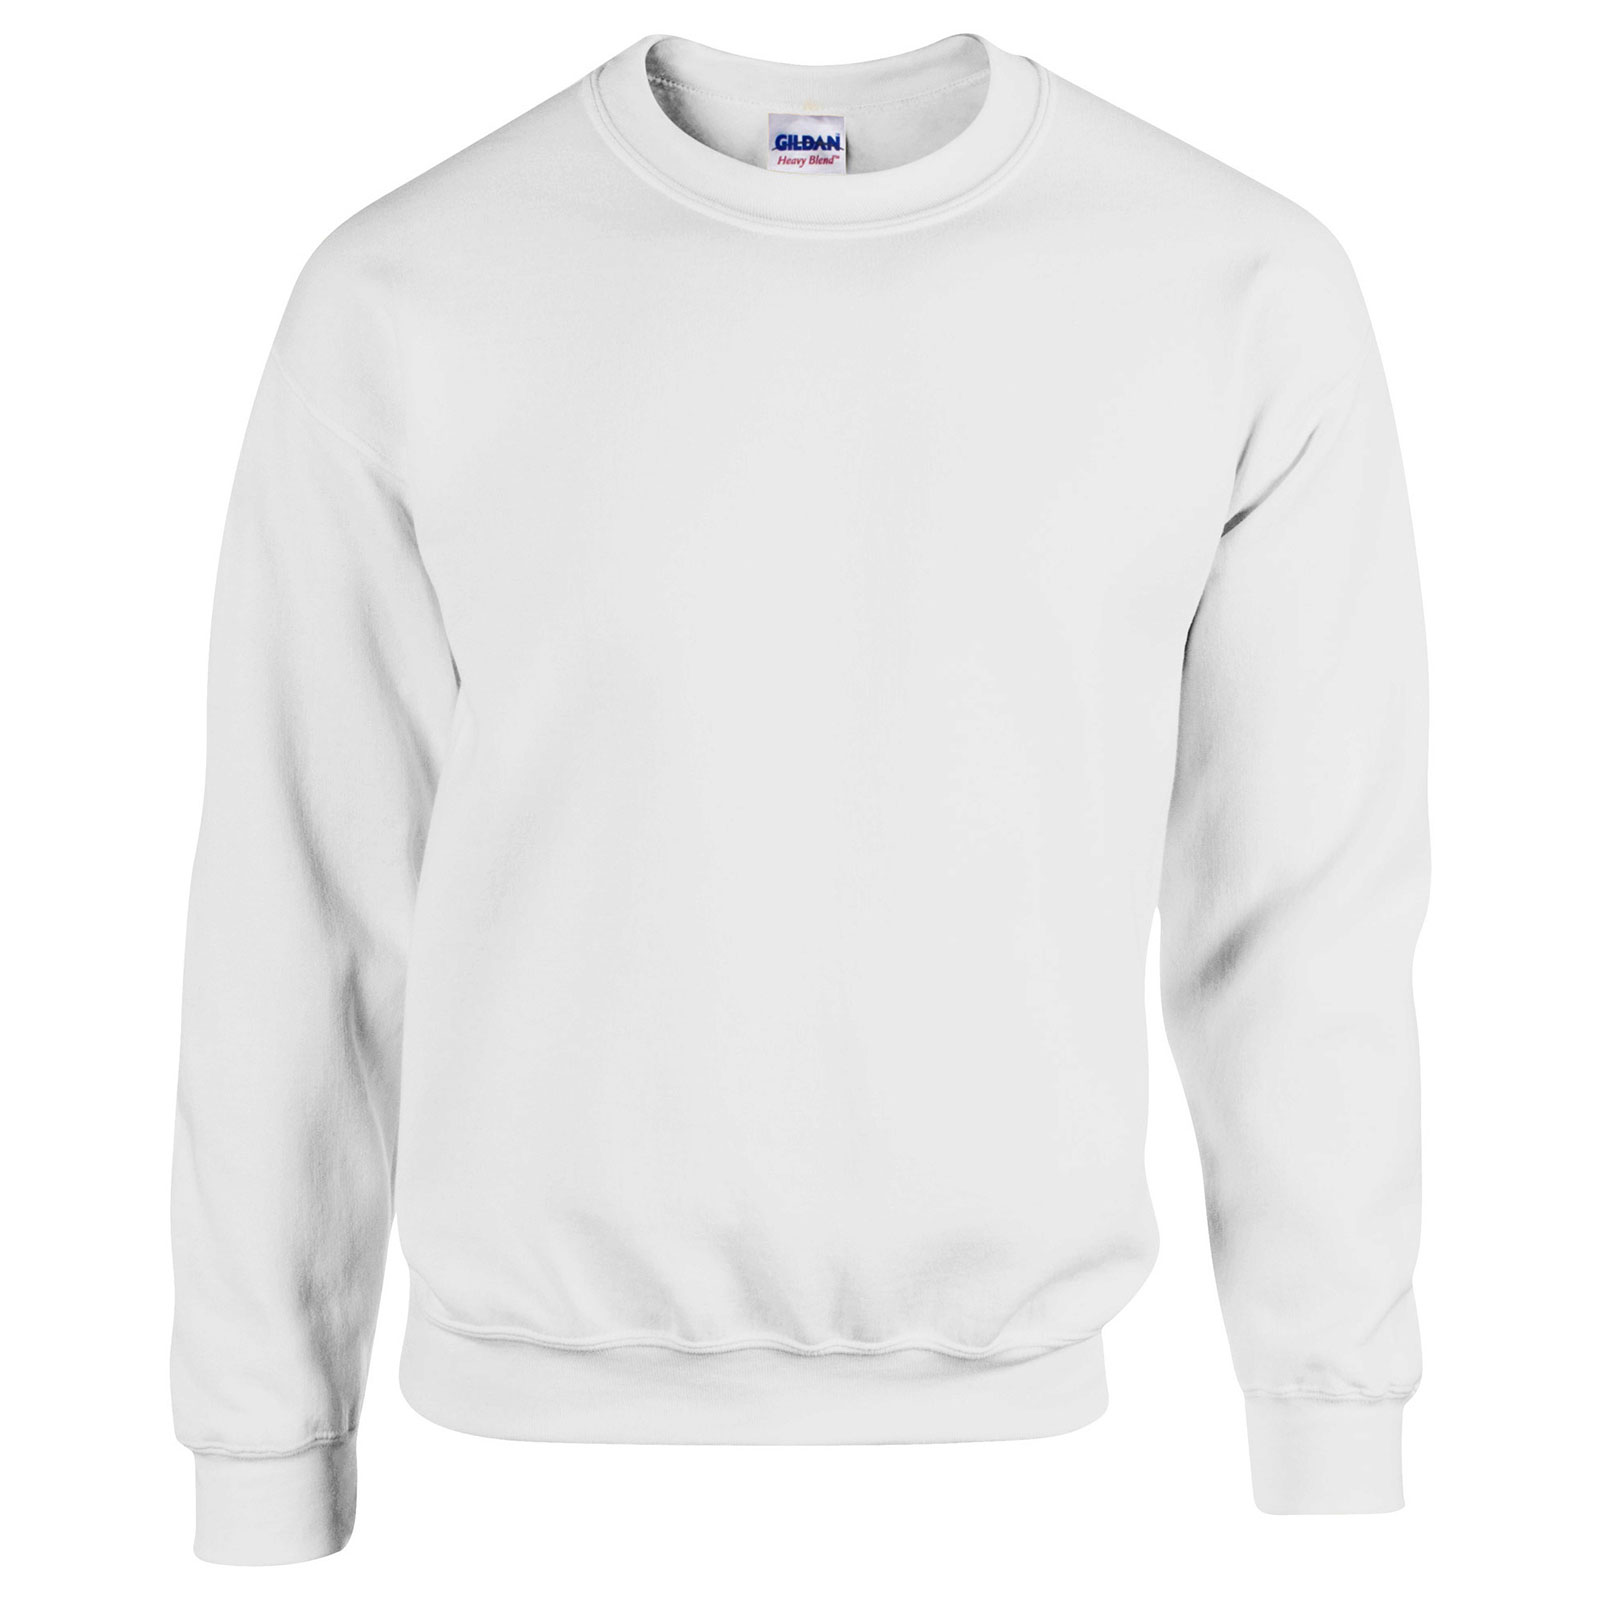 Download Trends For Blank Sweatshirts | Trend Style